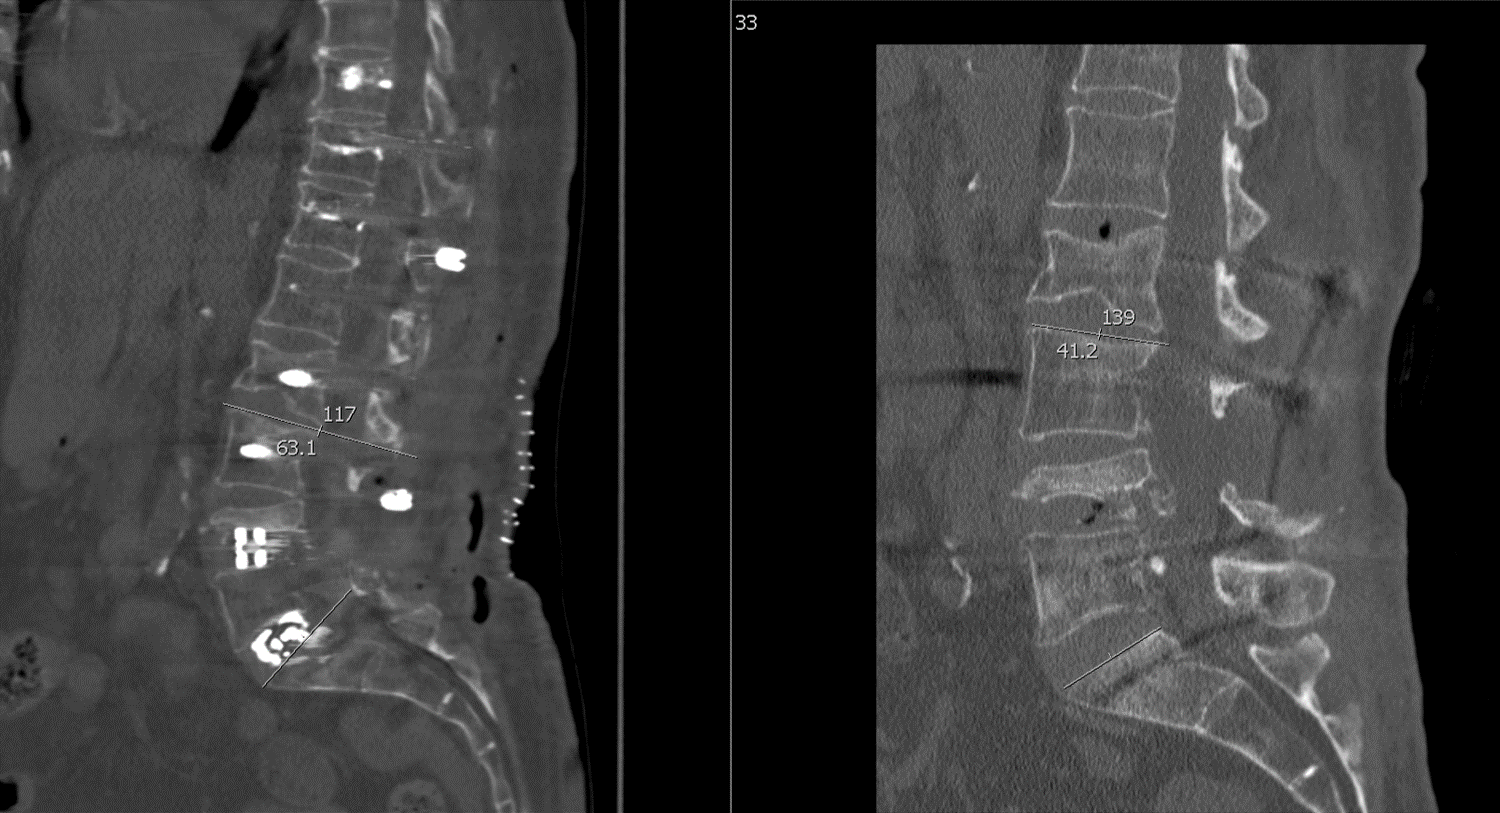 Pedicle Subtraction Osteotomy For Treatment Of Sagittal Plane Deformity